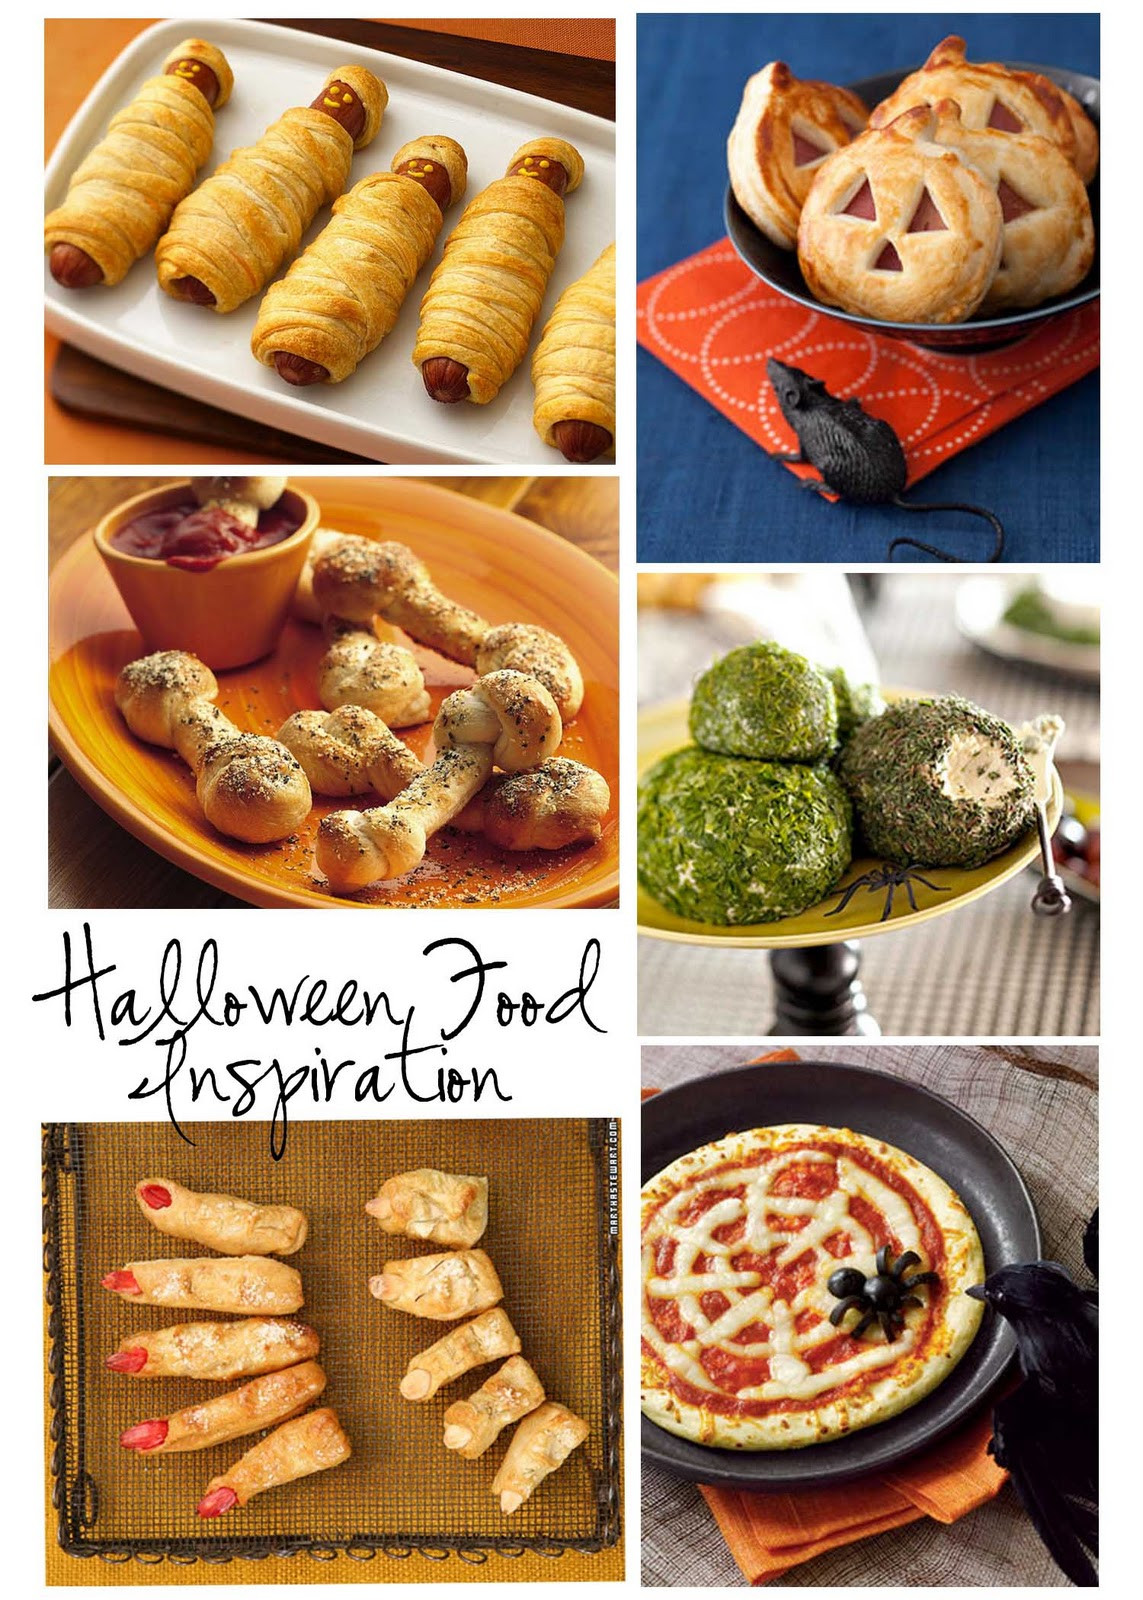 Halloween Party Snack Ideas
 Room to Inspire Spooky Food Ideas